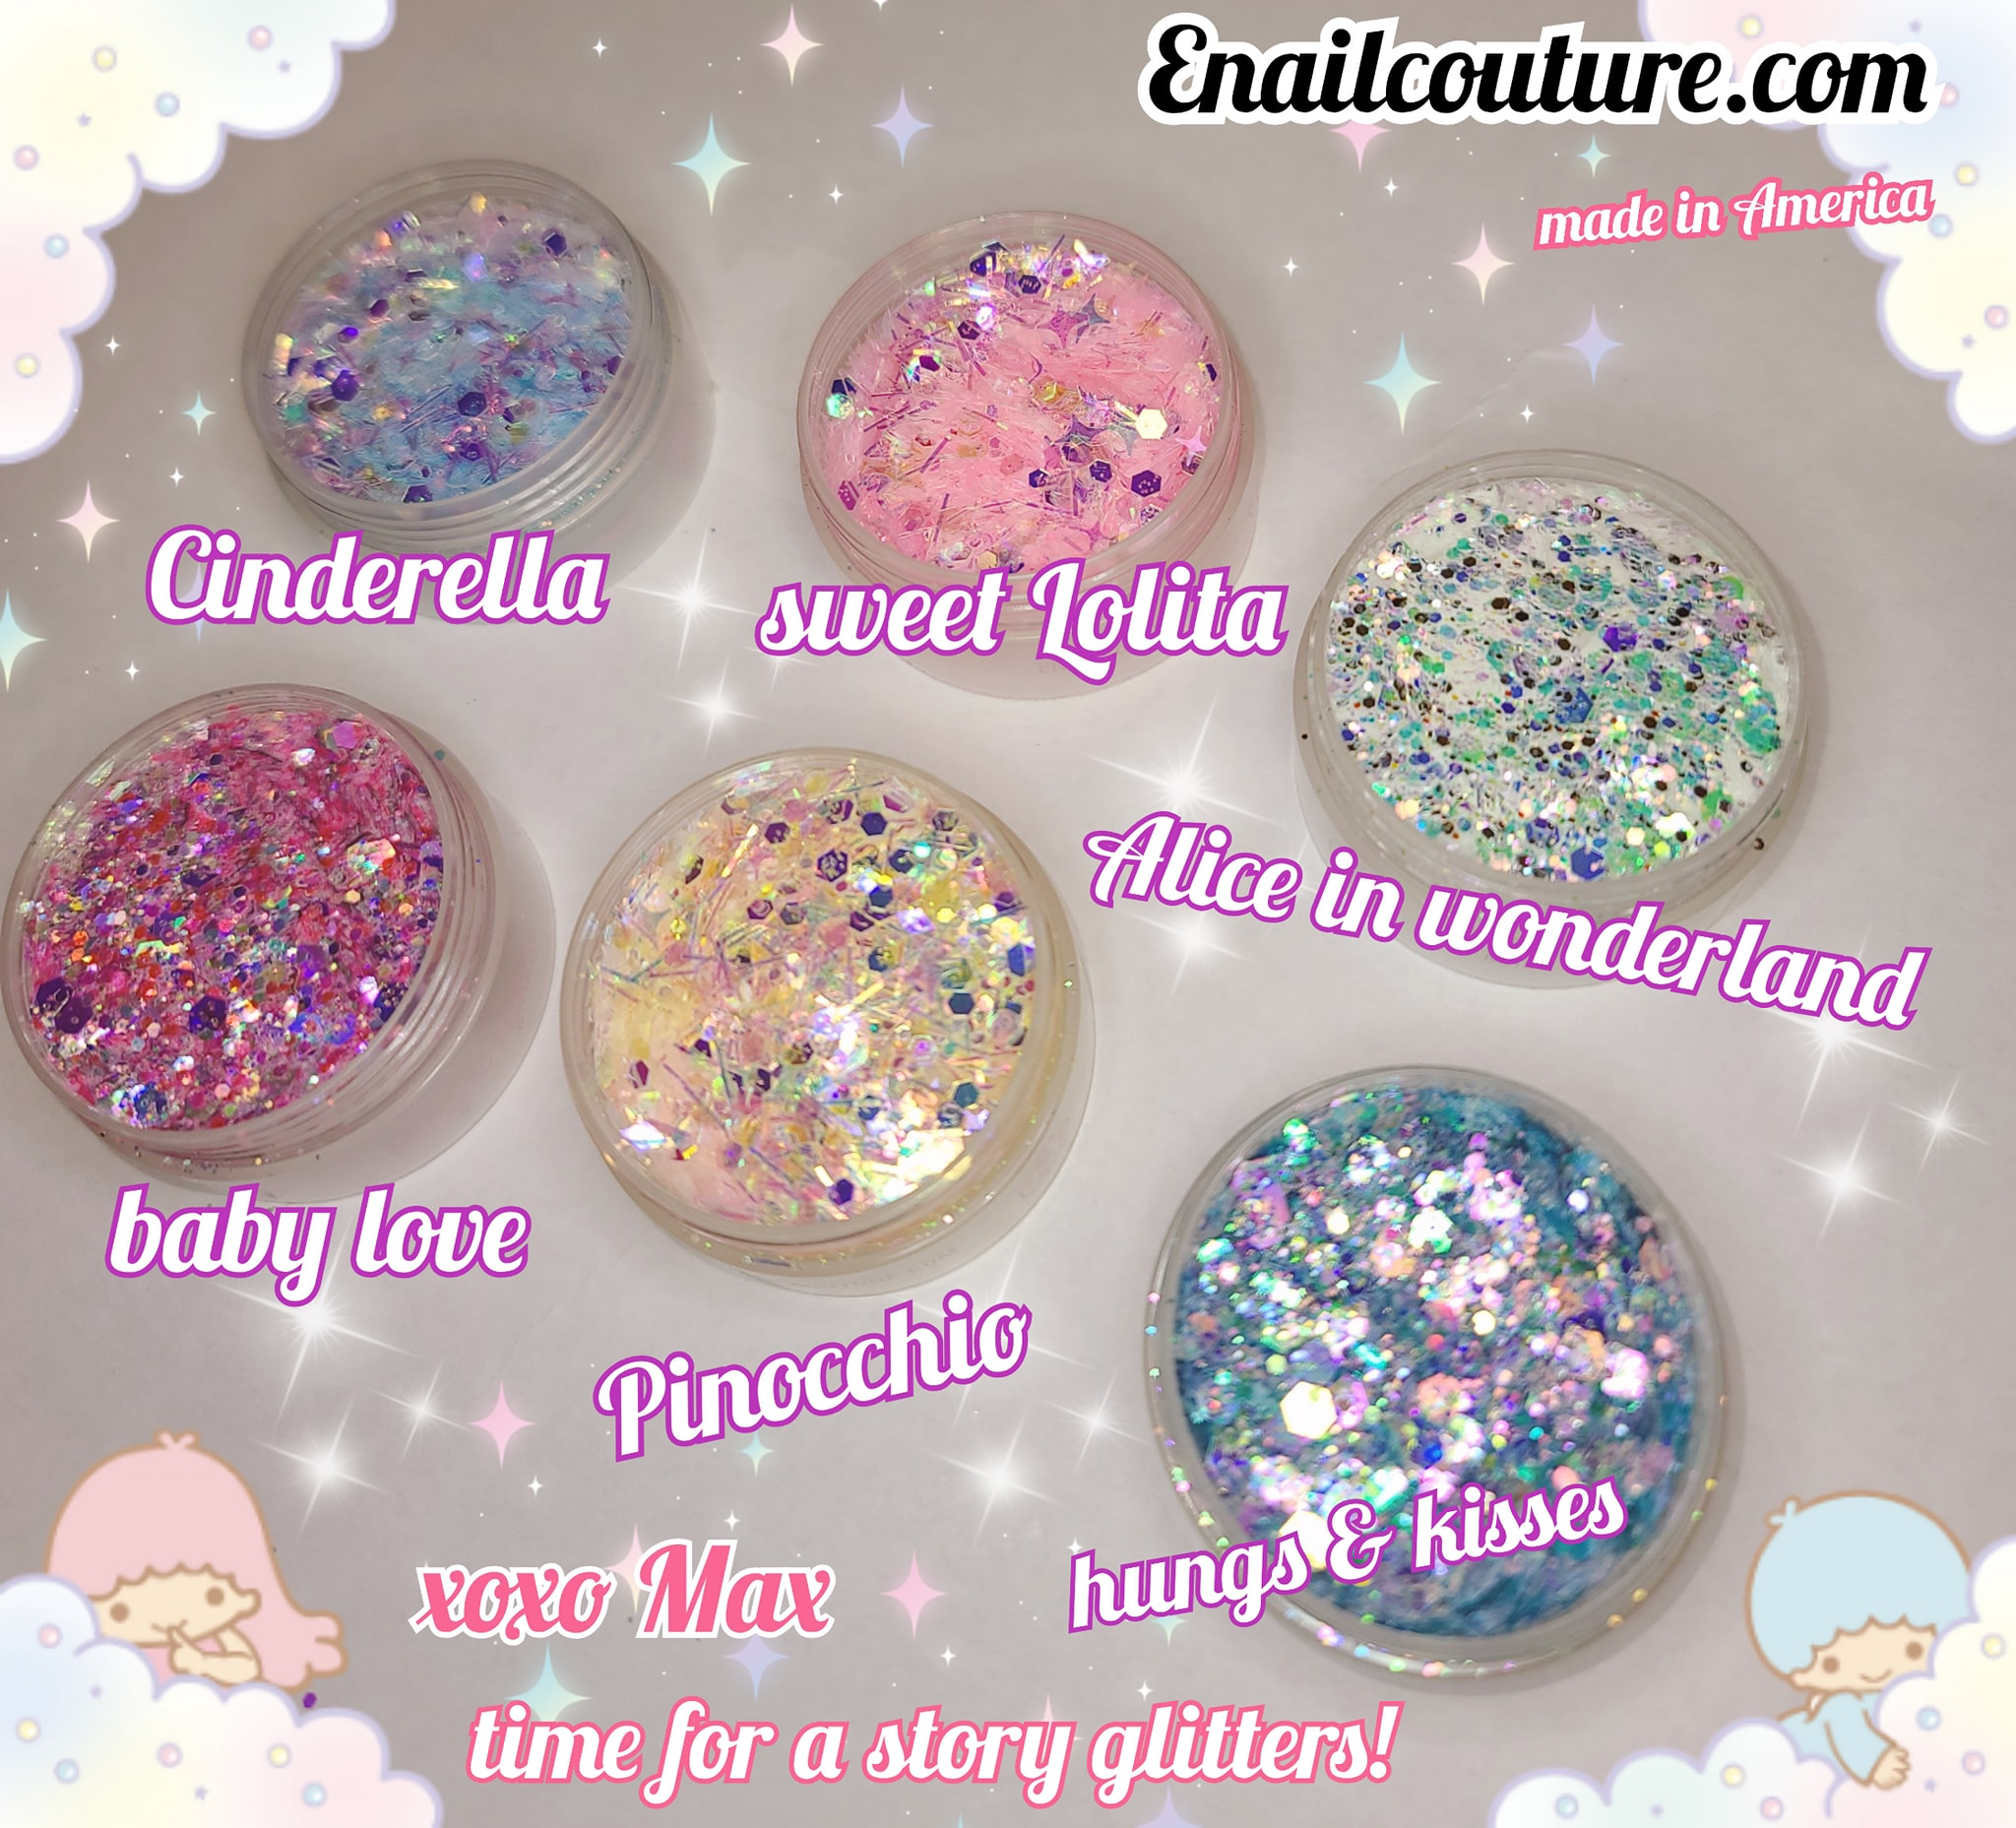 time for a story Glitter Mix series ! (Holographic Cosmetic Festival Chunky Glitters Sequins, Nail Sequins Iridescent Flakes, Cosmetic Paillette Ultra-thin Tips, for Body Face Hair Make Up Nail Art Mixed Color Glitter)